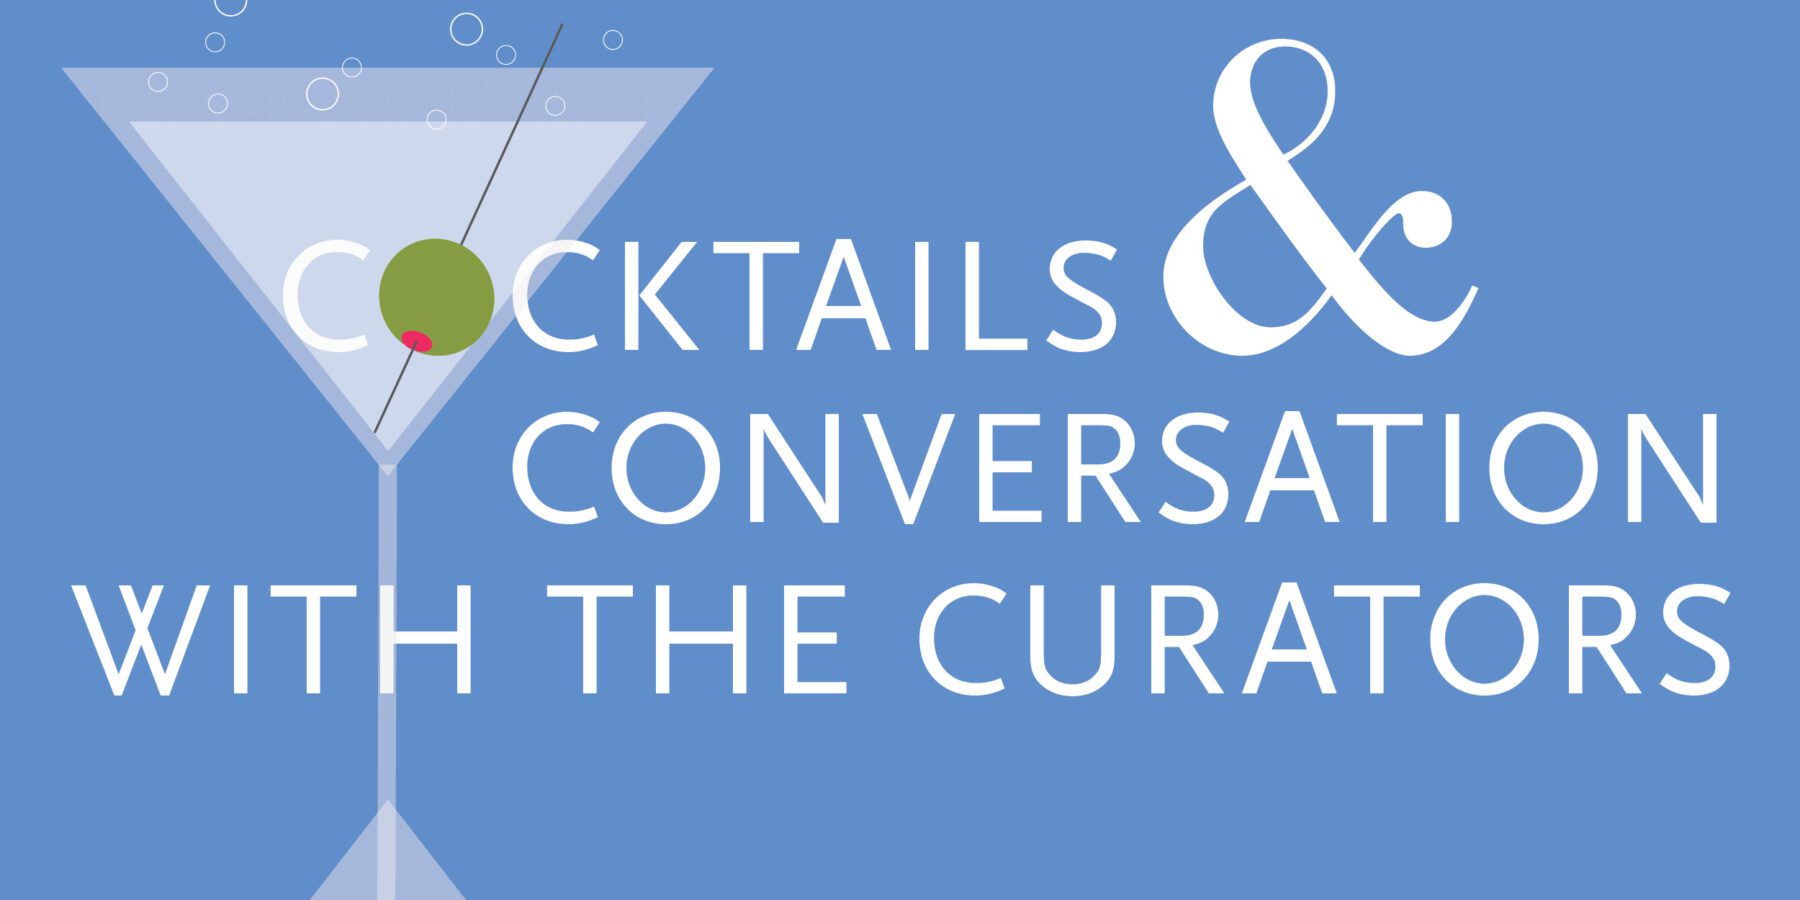 Cocktails and Conversation with the Curators